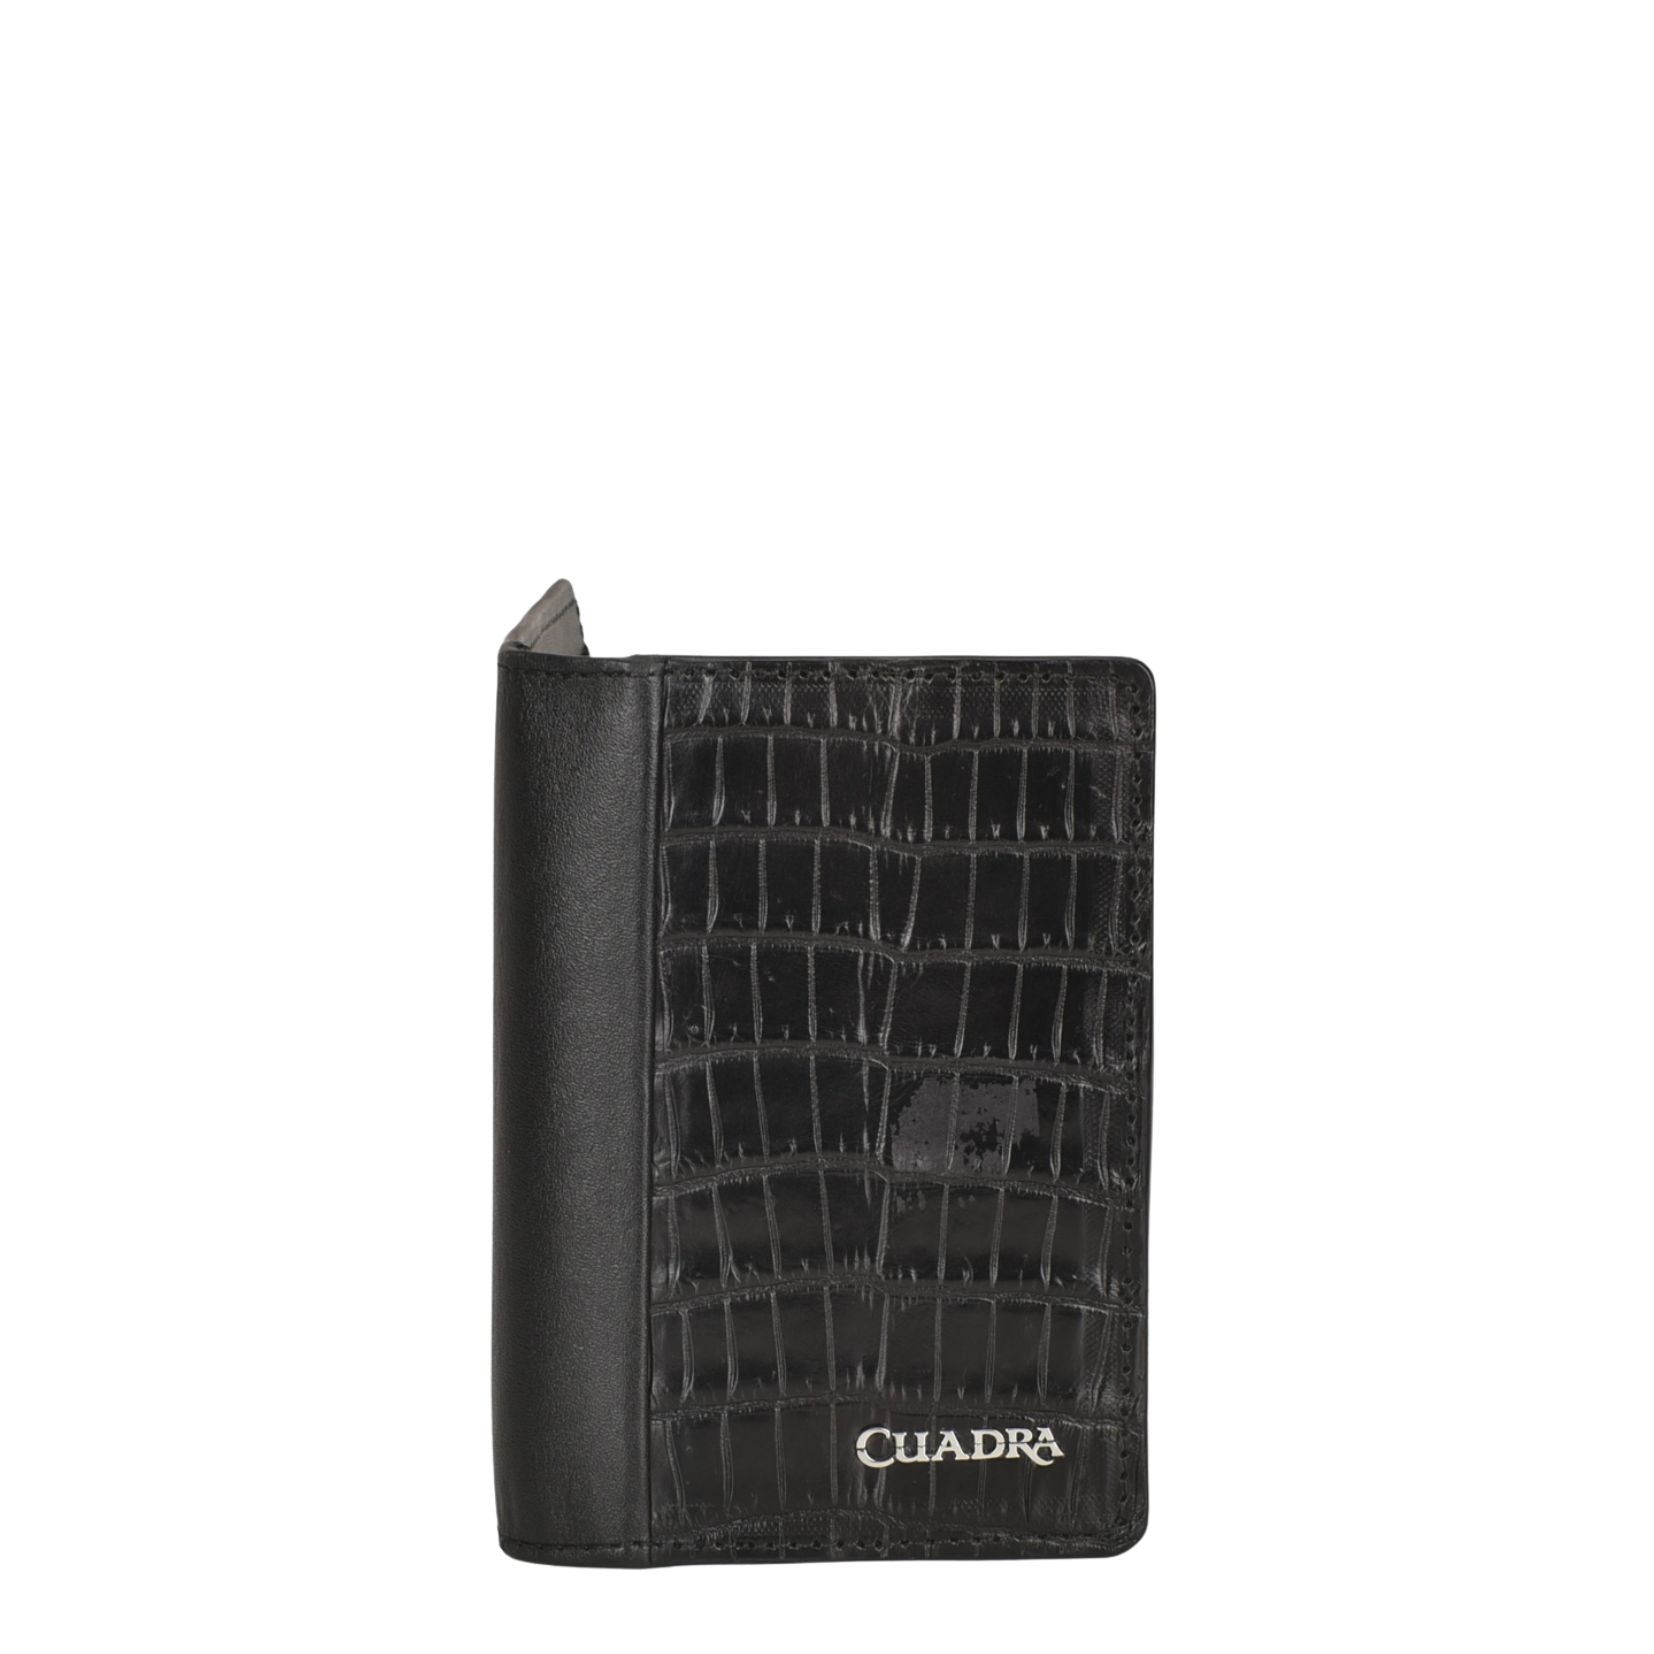 BC011NL - Cuadra black exotic wallet in niloticus leather for men-CUADRA-Kuet-Cuadra-Boots